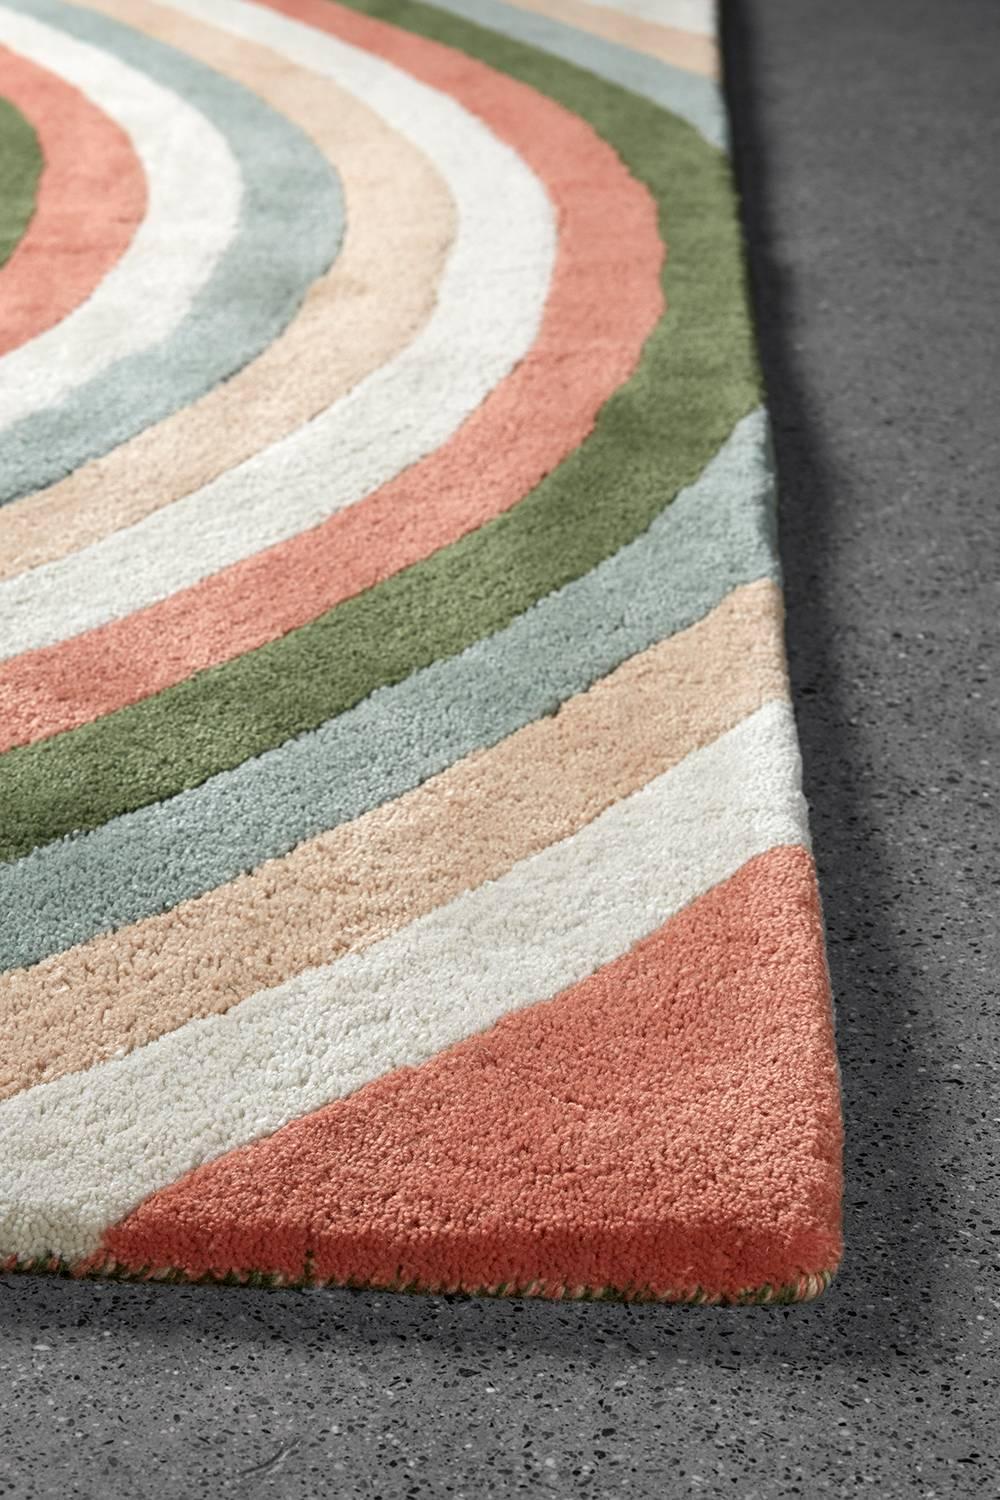 The simplicity of the Angela Adams Infinity / Daylight area rug invites us to stop and consider how a design can influence how we feel. Does the repeating pattern of concentric circles make you feel solitary and peaceful? Does it awaken your senses